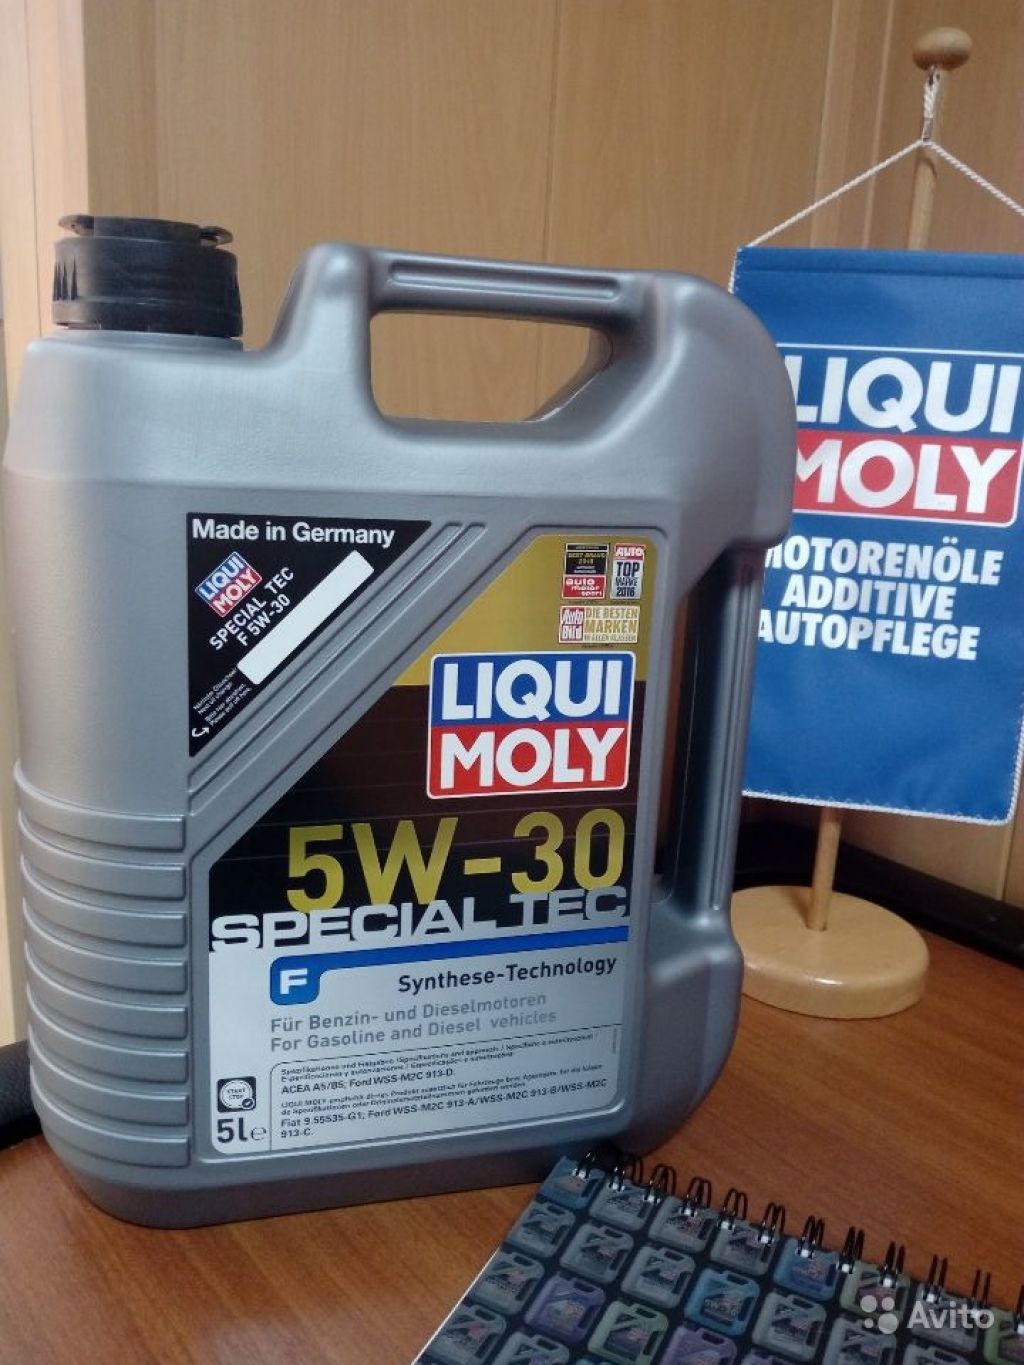 Моторное масло special tec aa 5w 30. Liqui Moly Special Tec f 5w-30. Масло моторное Liqui Moly 5w30 Special Tec f. Liqui Moly Special Tec f. Liqui Moly 5 30.